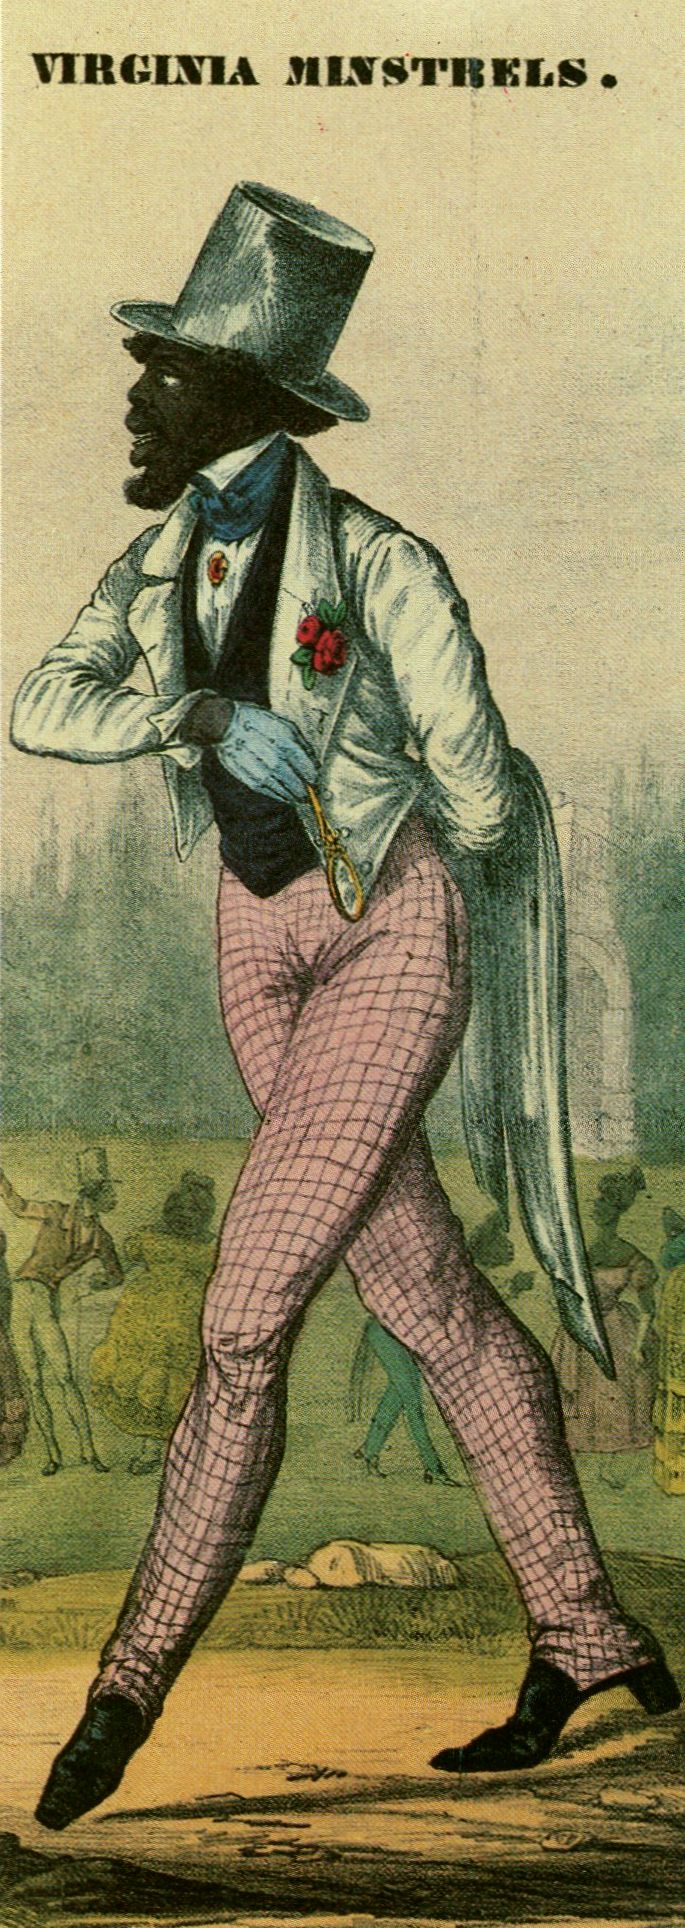 Cruel racial stereotypes were were the minstrel's stock in trade. "Dandy Jim, from Caroline," adorned an 1844 song sheet. Created by the original Virginia Minstrels, he was one of hundreds of similar preening, irresponsible, impossibly overdressed characters who strutted their gaudy stuff on the minstrel stage. Collection of Lester Levy.